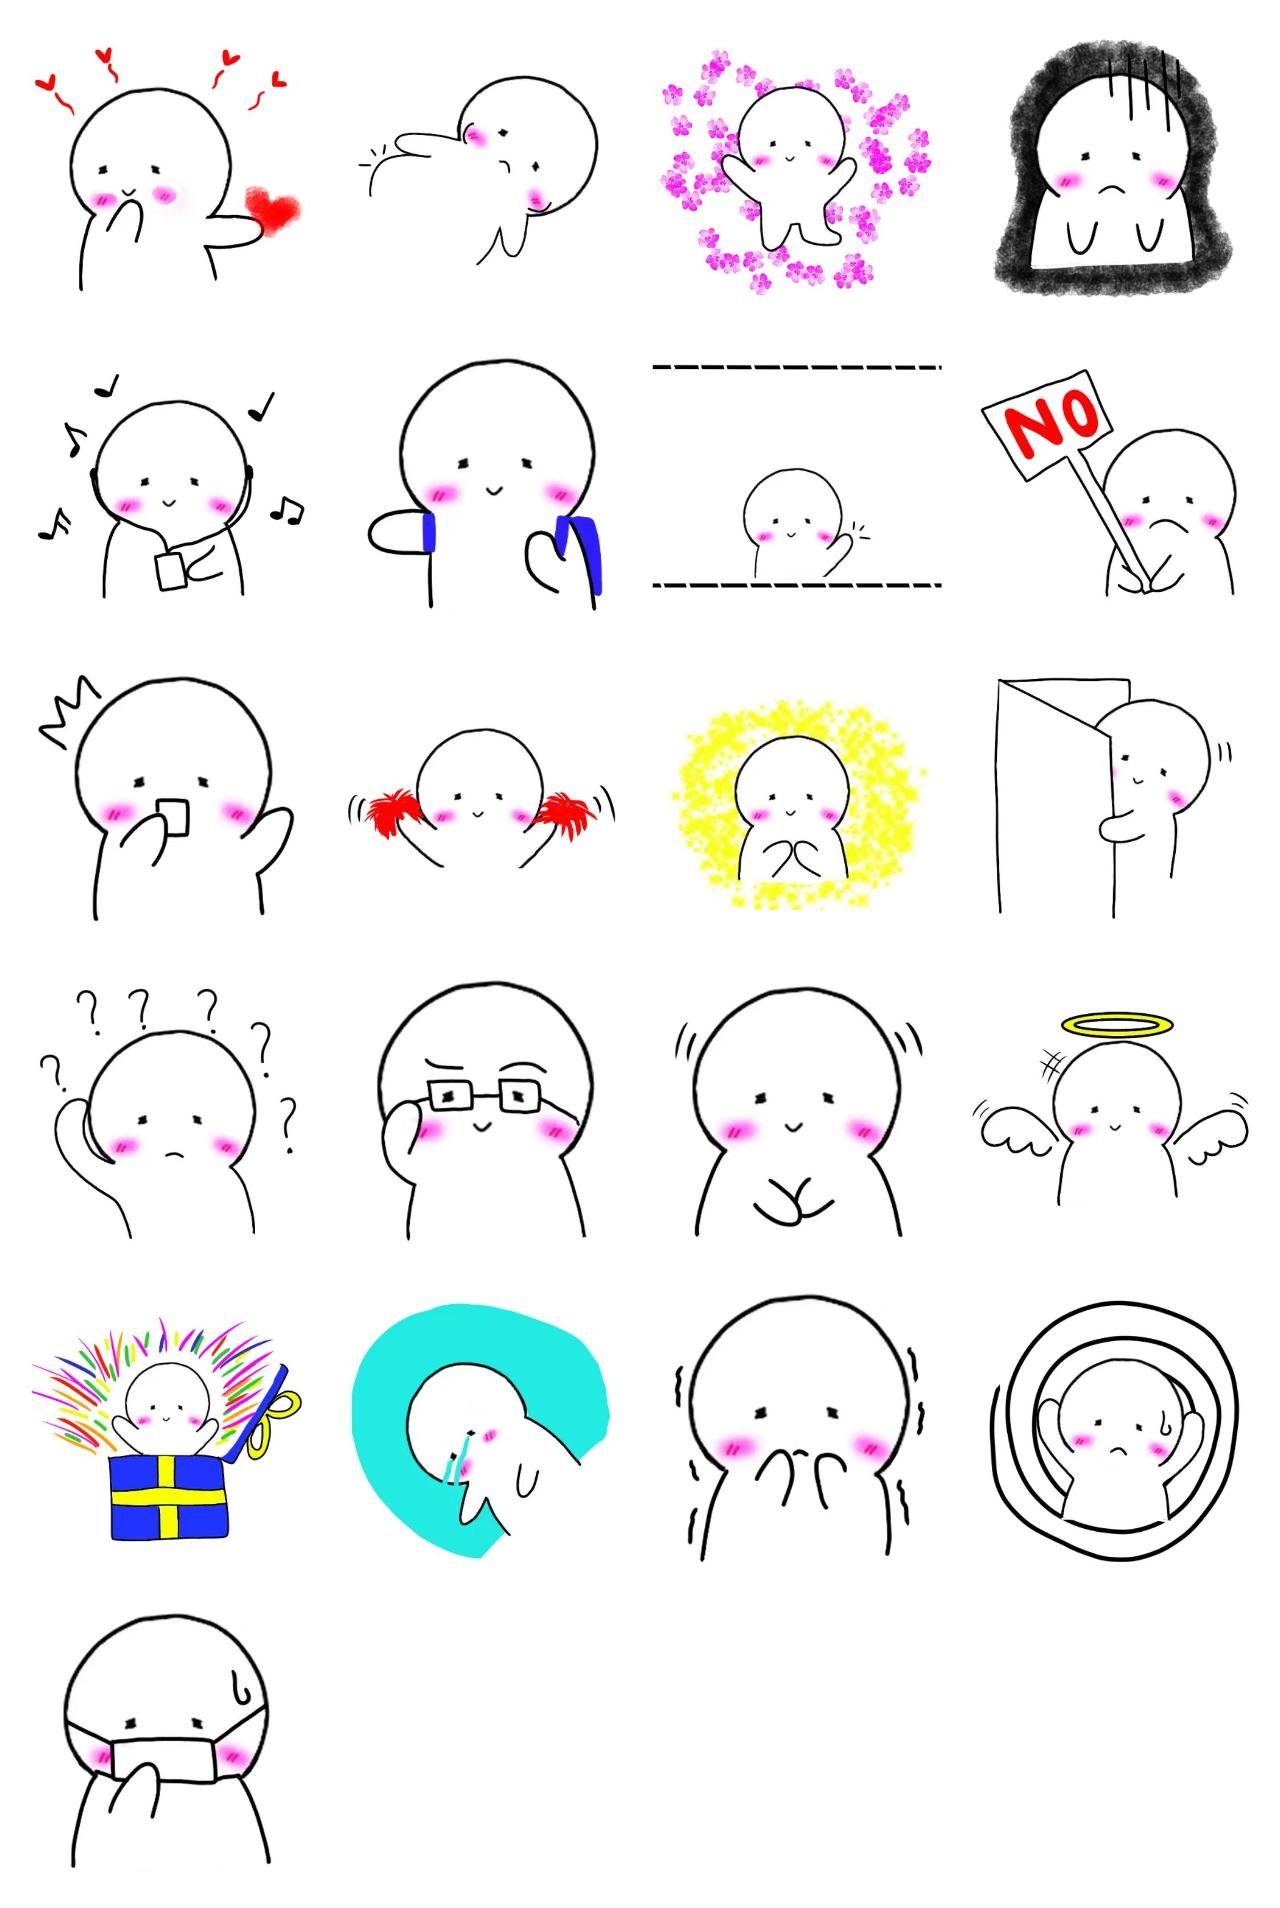 Kamu People sticker pack for Whatsapp, Telegram, Signal, and others chatting and message apps